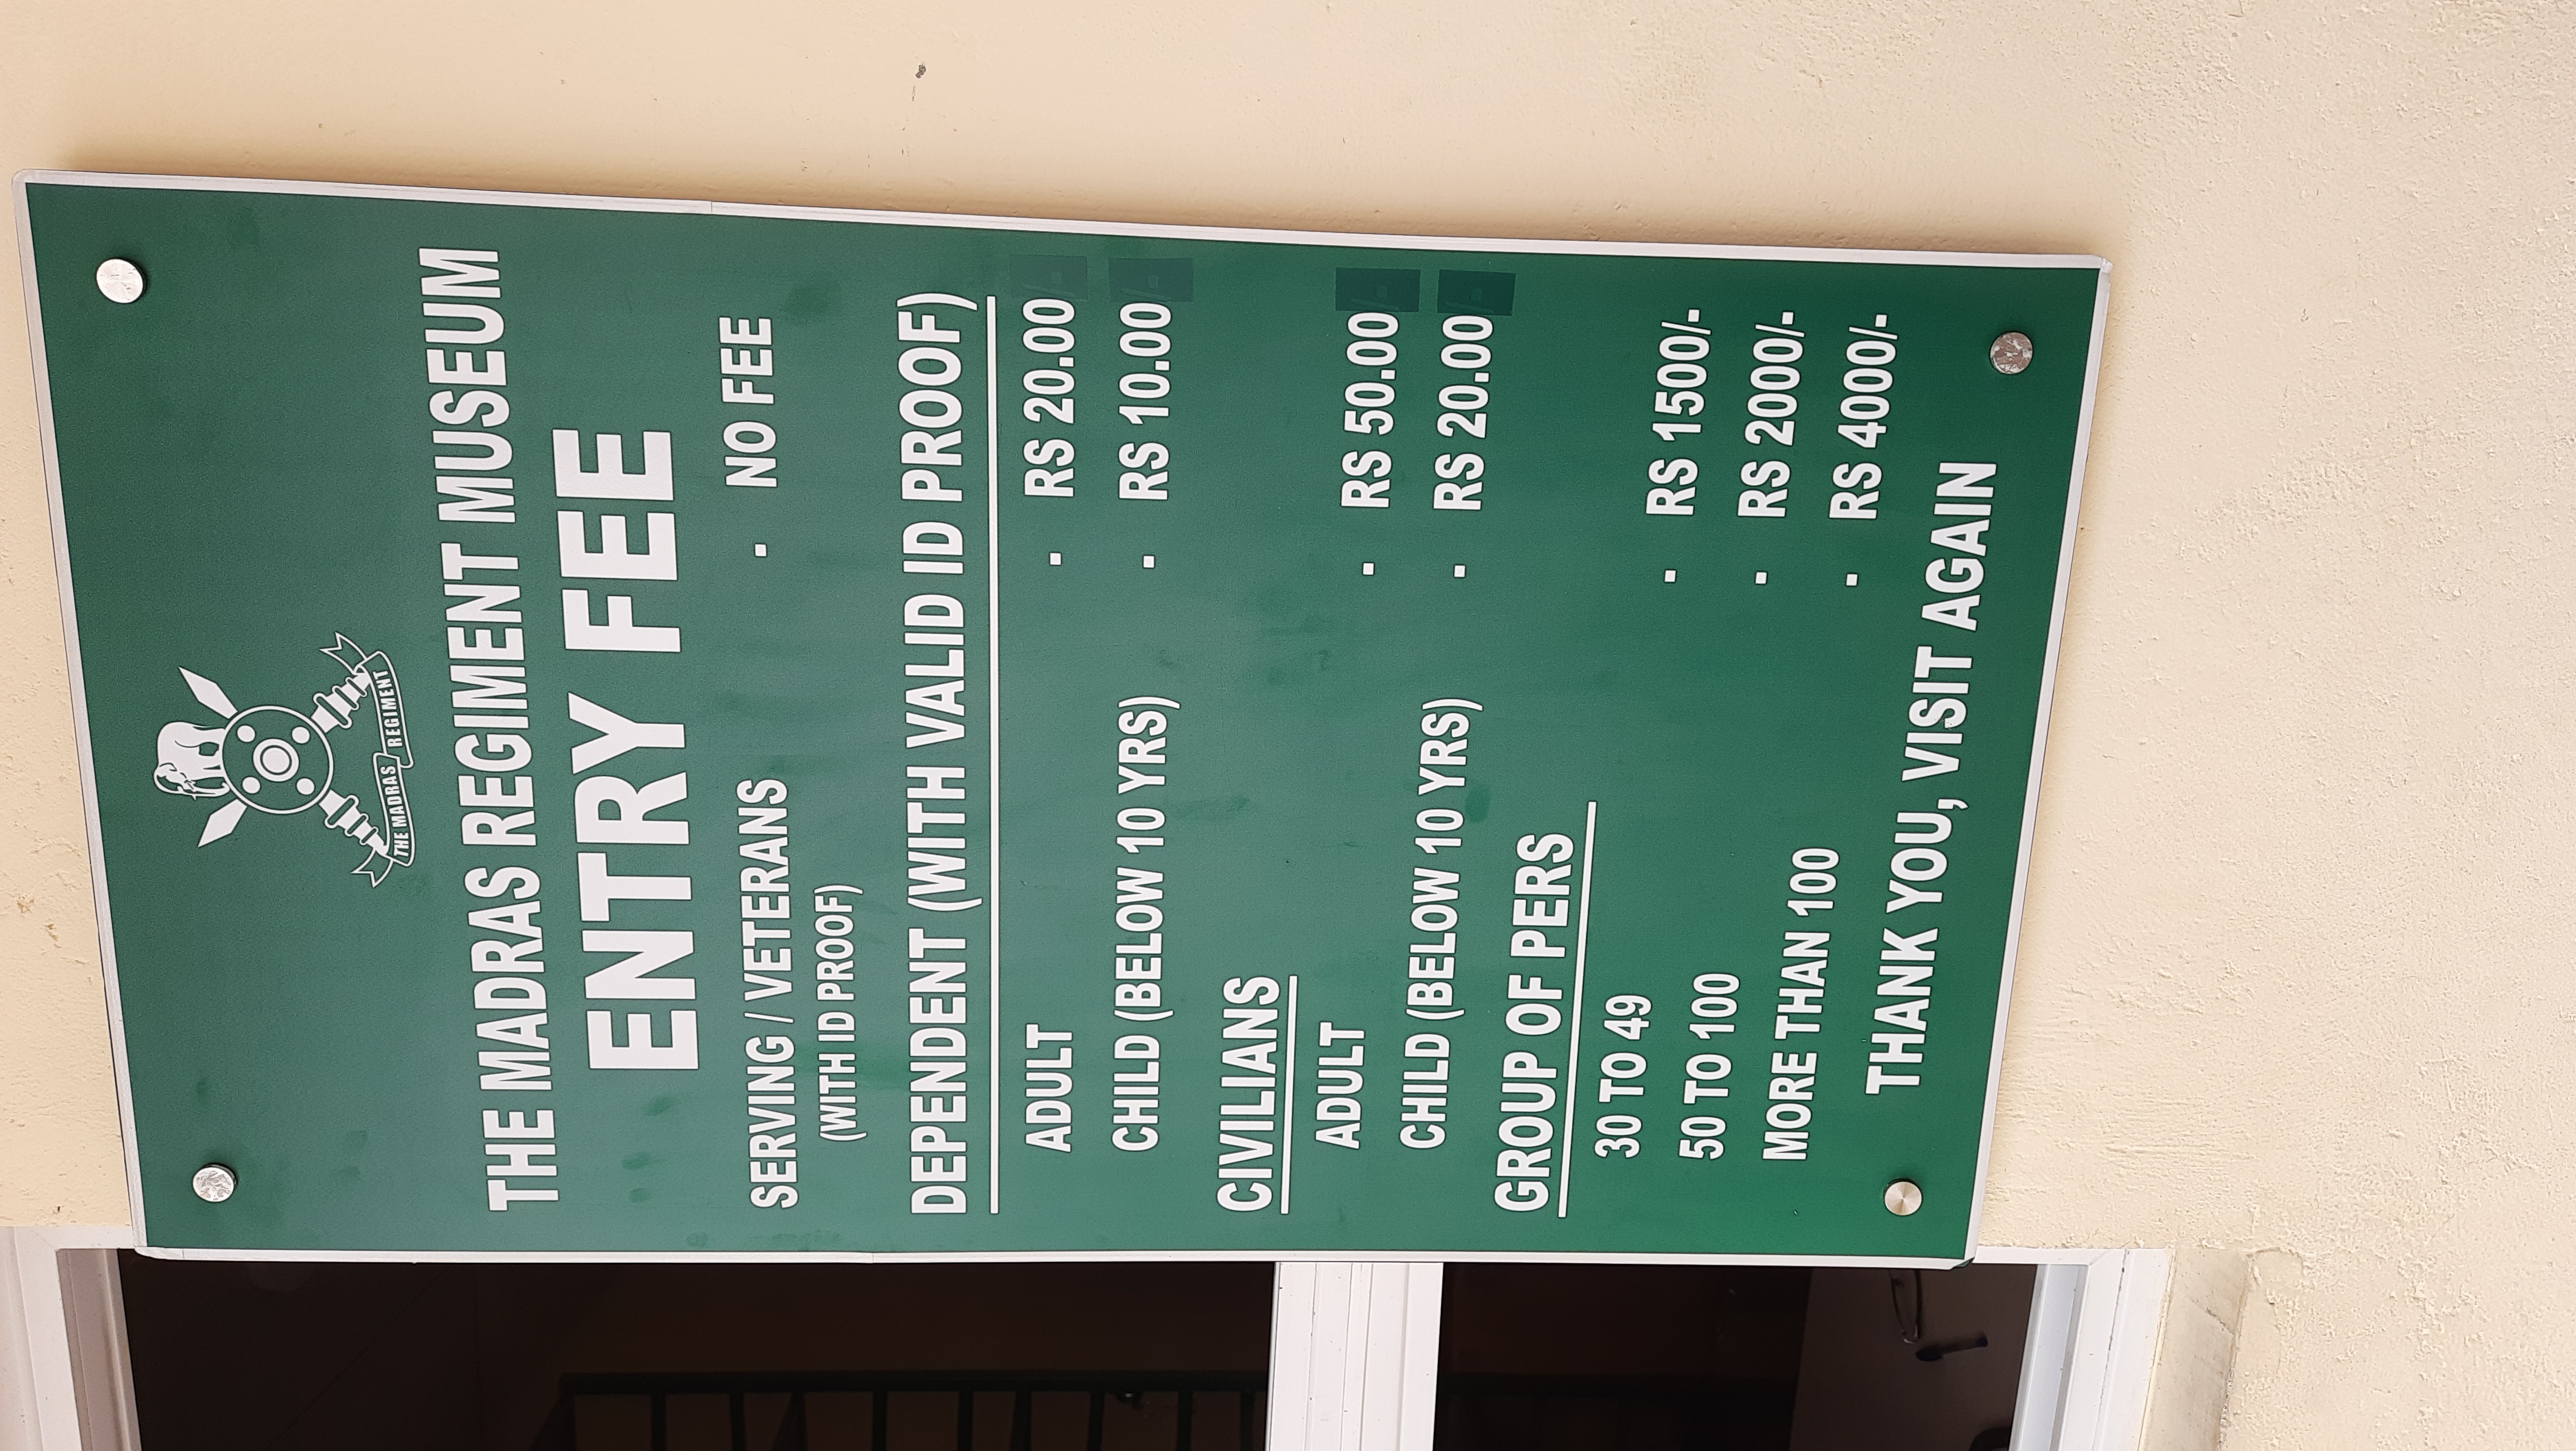 Entry fee details of the regimental museum